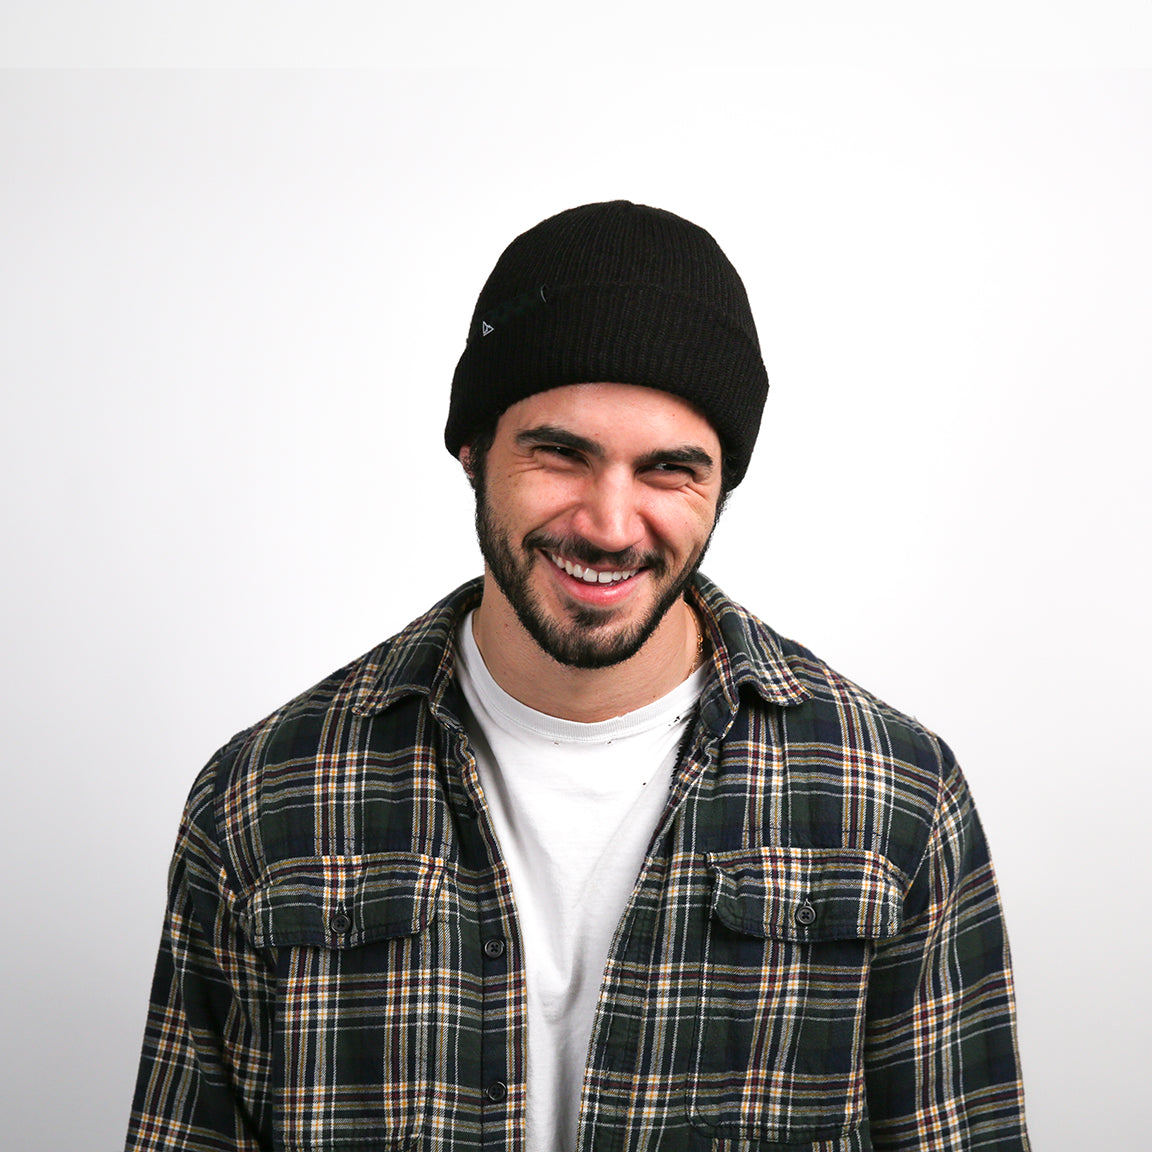 The person in the image is wearing a black ribbed knit beanie with a rolled-up brim. The beanie fits snugly on the head, providing warmth and a touch of style to a casual outfit, highlighted by a genuine smile.